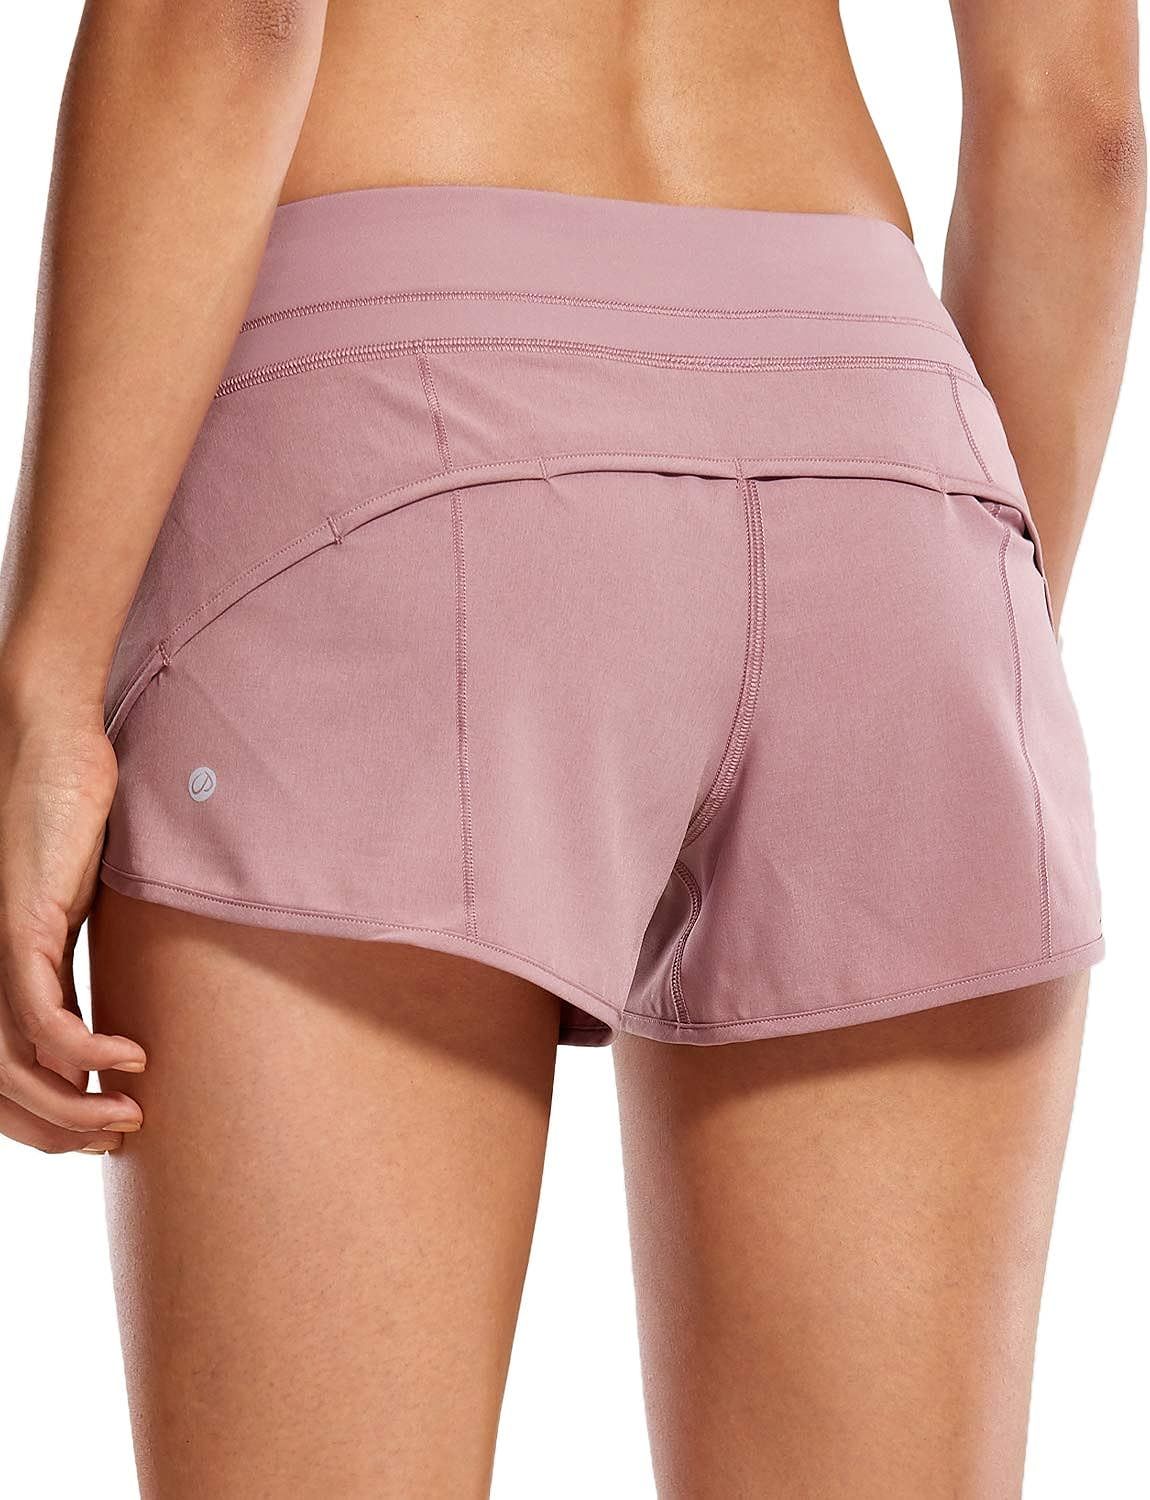 CRZ YOGA Women's Quick-Dry Workout Sports Active Running Shorts - 2.5 Inches | Amazon (US)